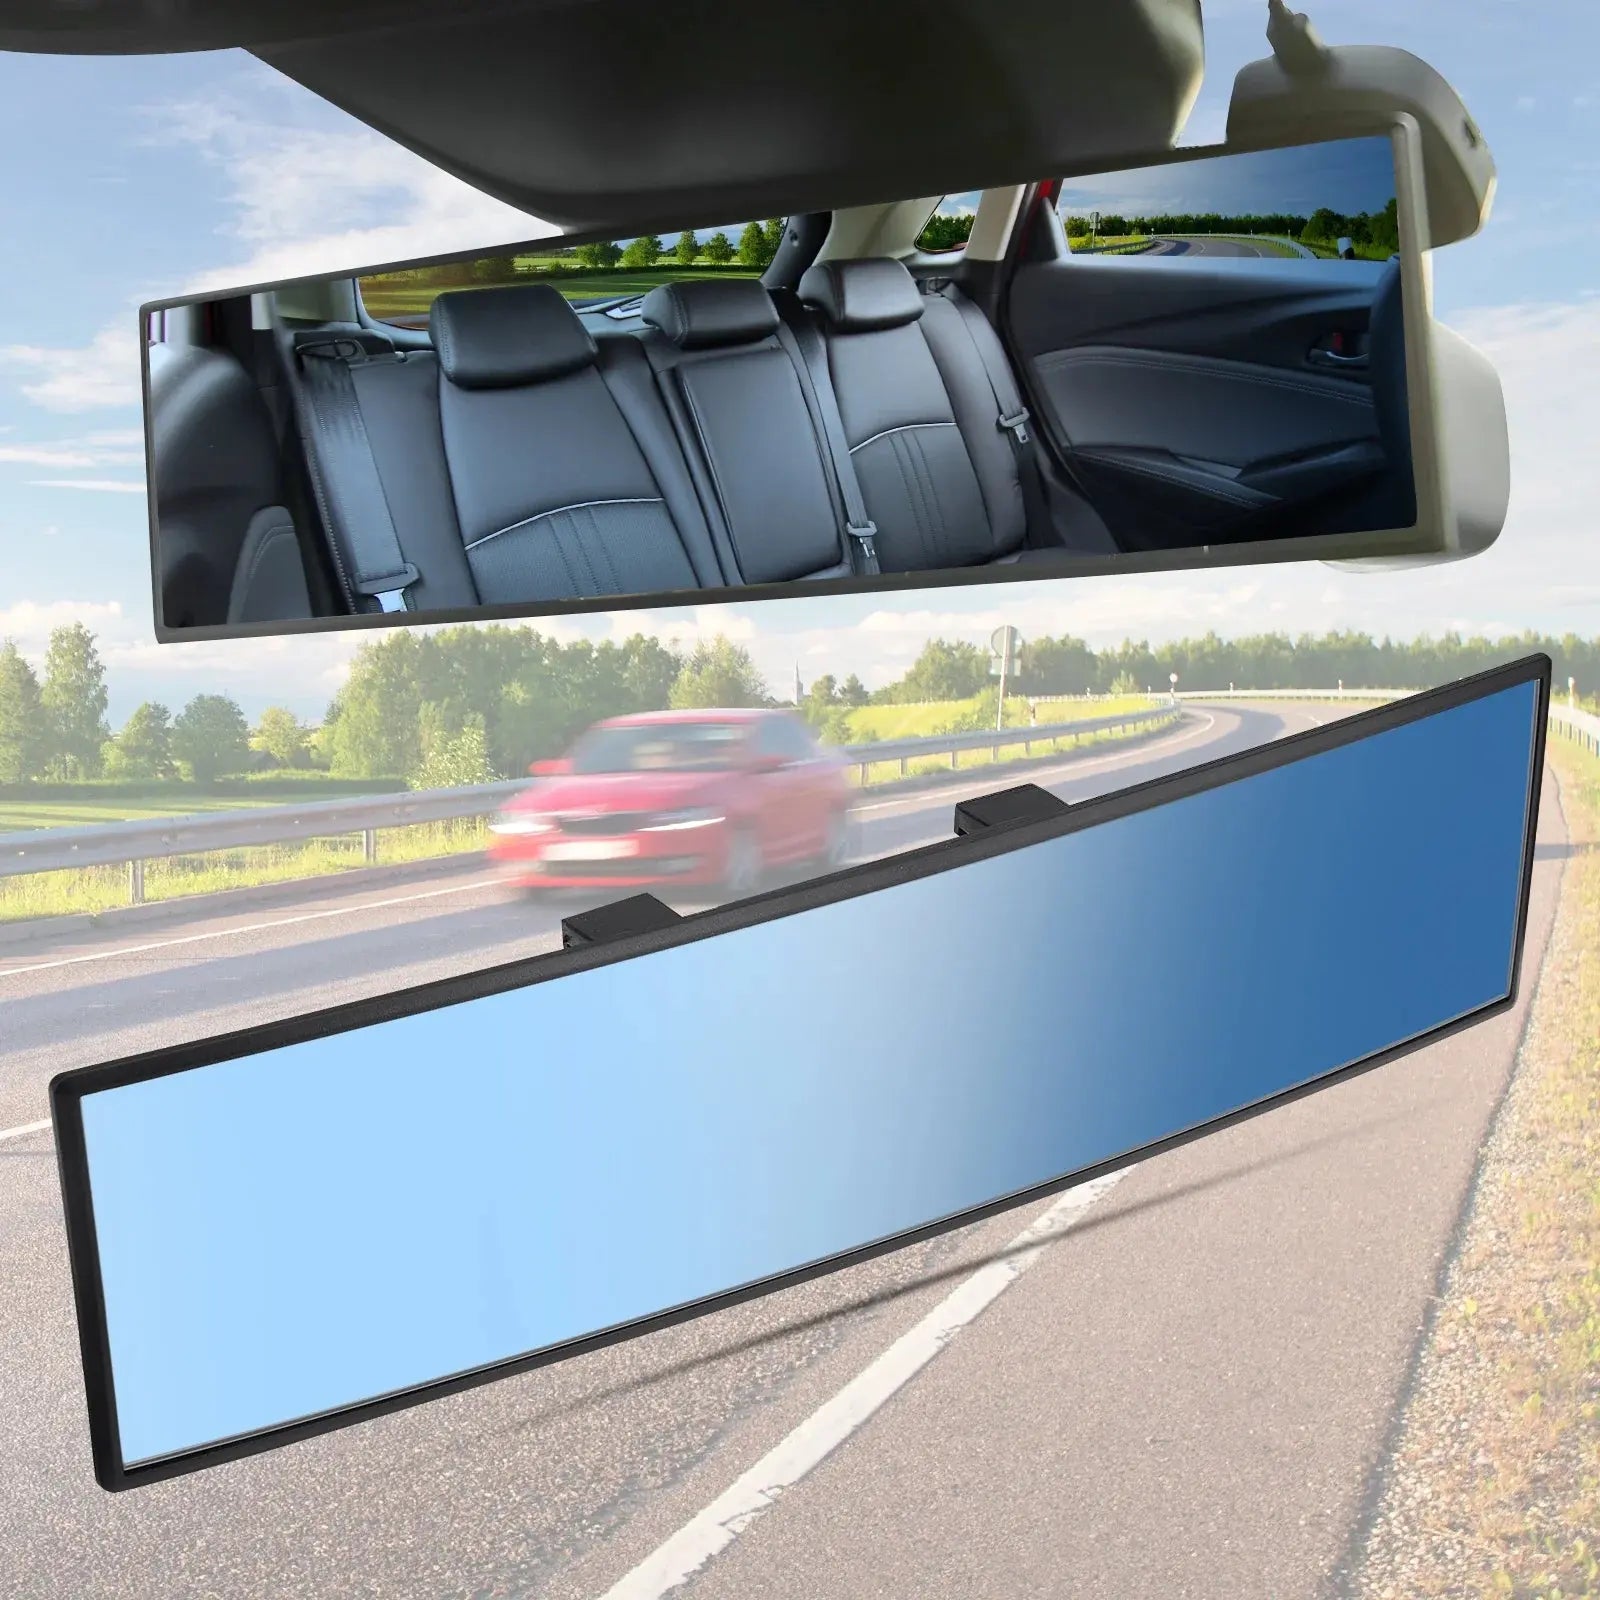 Universal Rear View Mirror 30cm Panoramic Convex Rearview Mirror For Car SUV Truck Anti-glare Clip-on Wide Angle Interior Mirror BrothersCarCare